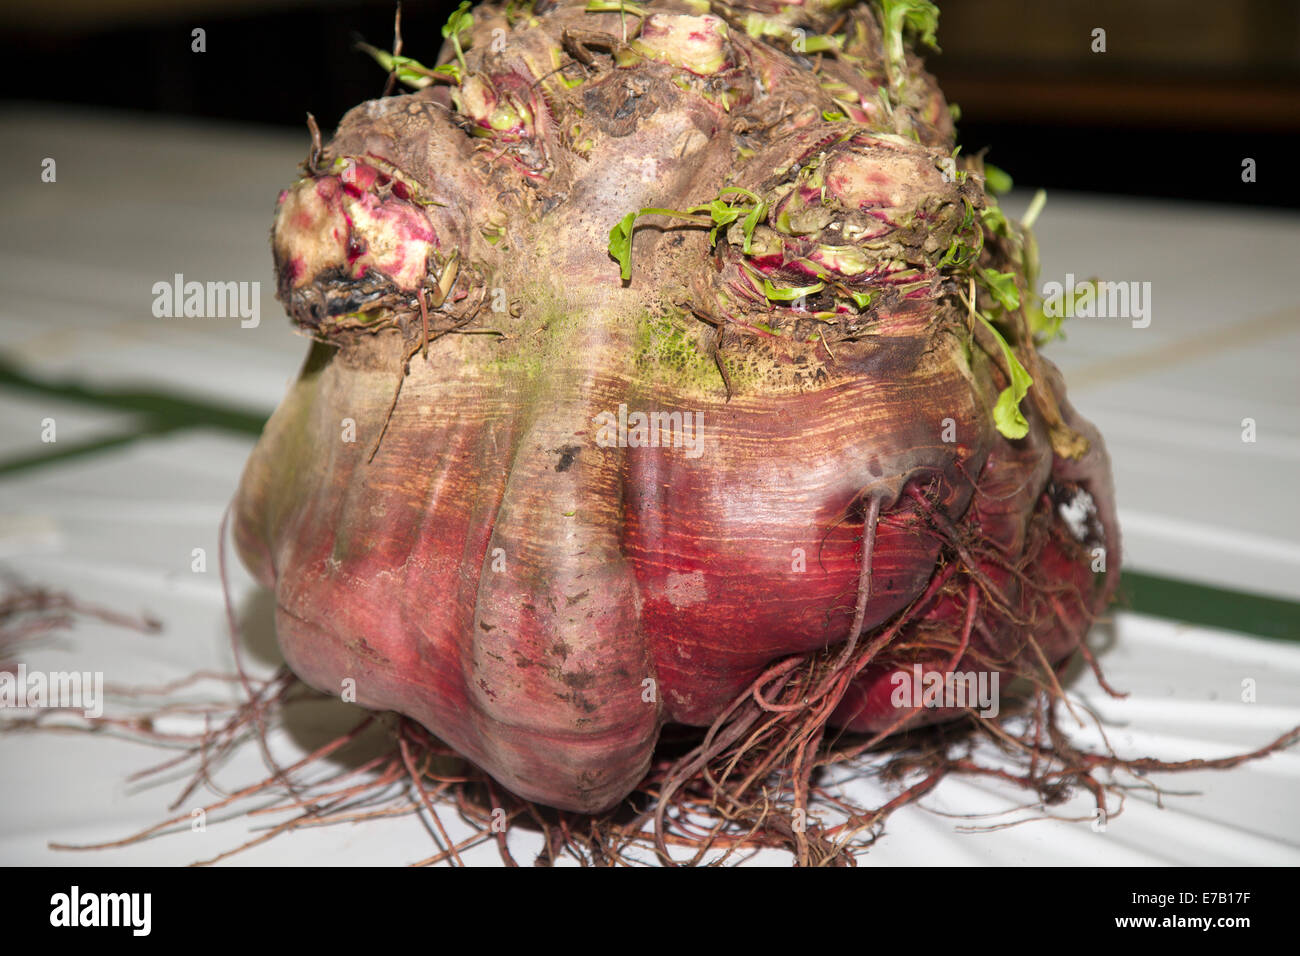 Face ib fruit in Harrogate, Yorkshire, UK. 11th Sept, 2014.  Waste Food, wonky vegetables, deformed, misshapen, malformed, distorted, crooked, irregular, misproportioned, ill-proportioned, ill-shaped, ugly rejected beetroot at the Harrogate Annual Autumn Flower Show, attractions include the giant vegetable competition, and is ranked as one of Britain's top three gardening events. Stock Photo